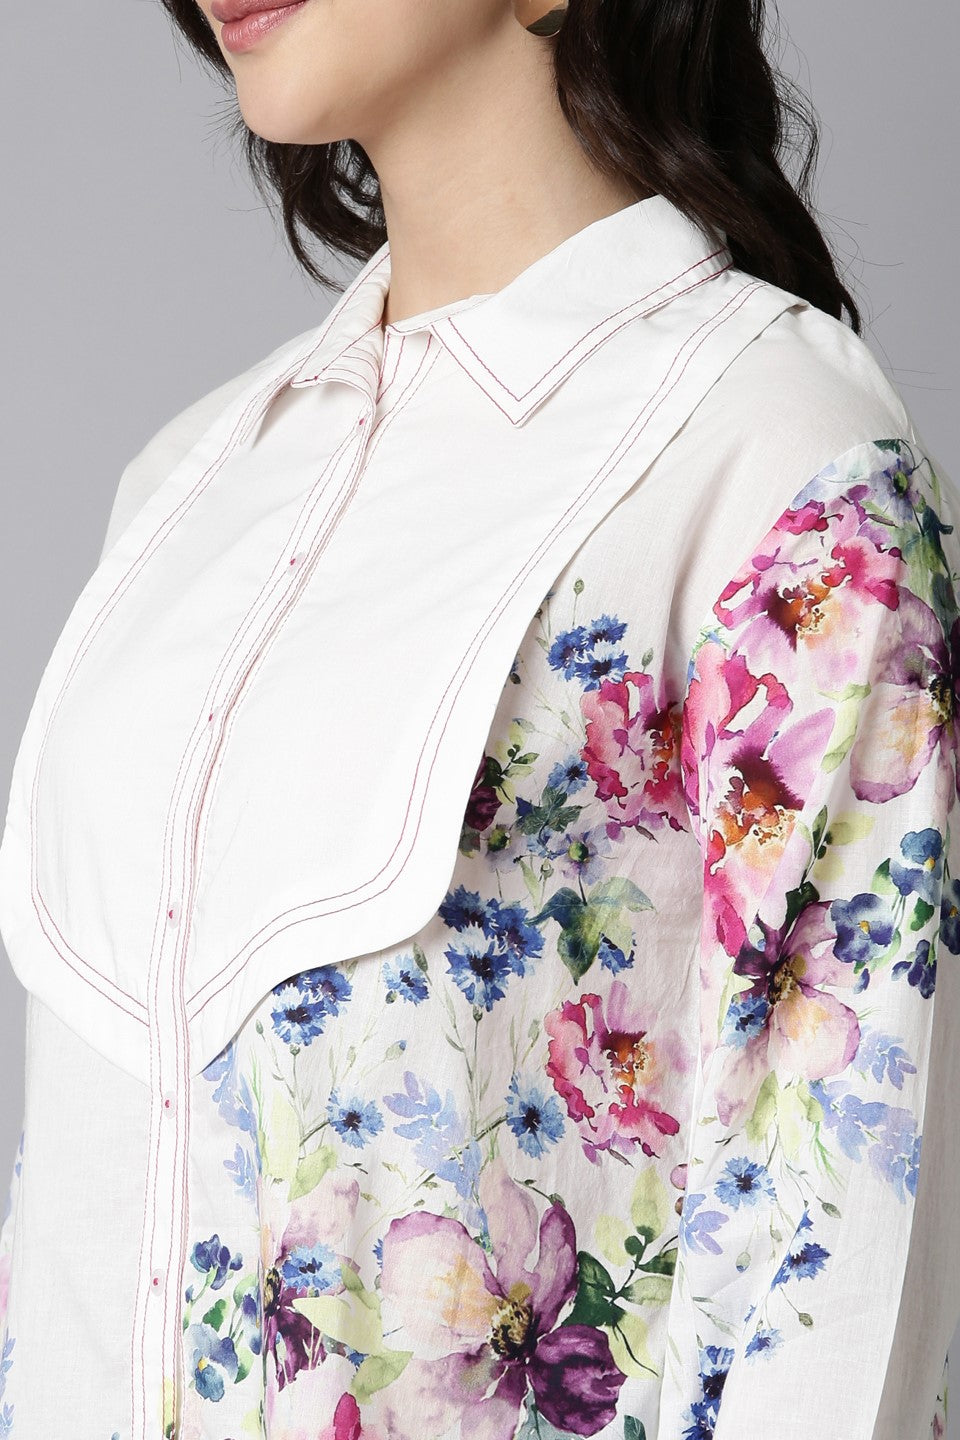 White Floral Printed French Cotton Shirt